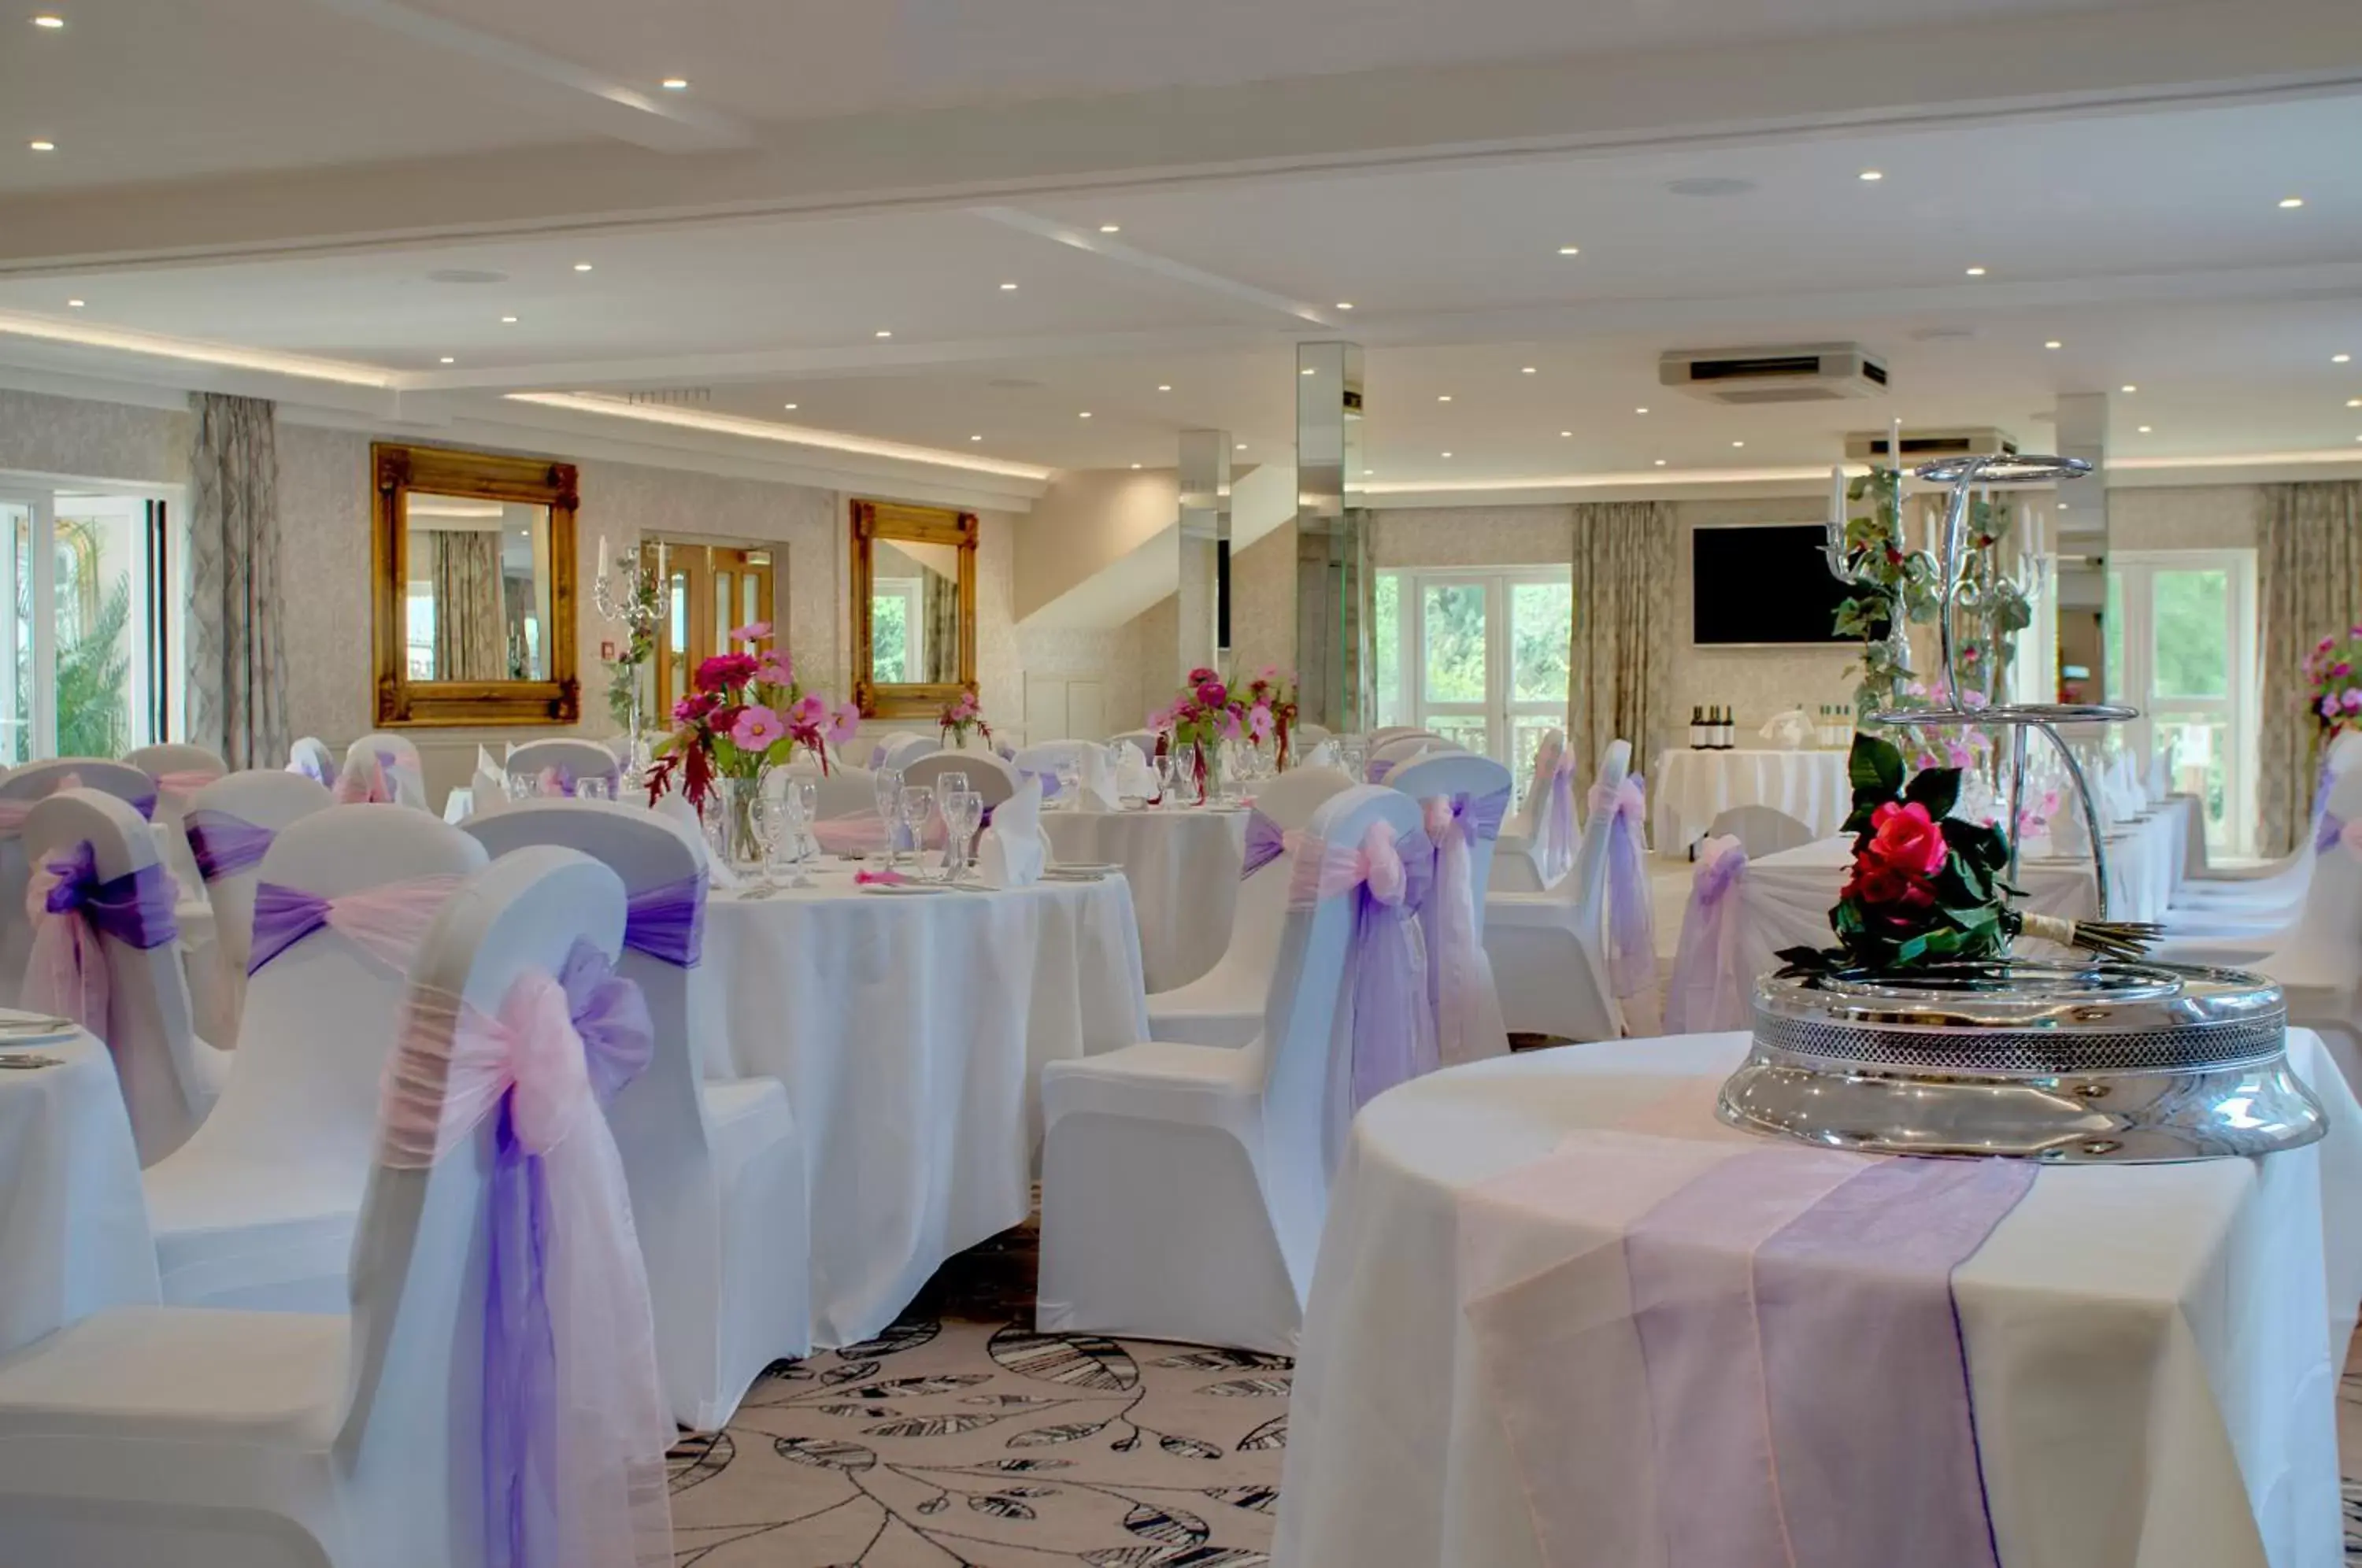 Banquet/Function facilities, Banquet Facilities in Best Western Ivy Hill Hotel